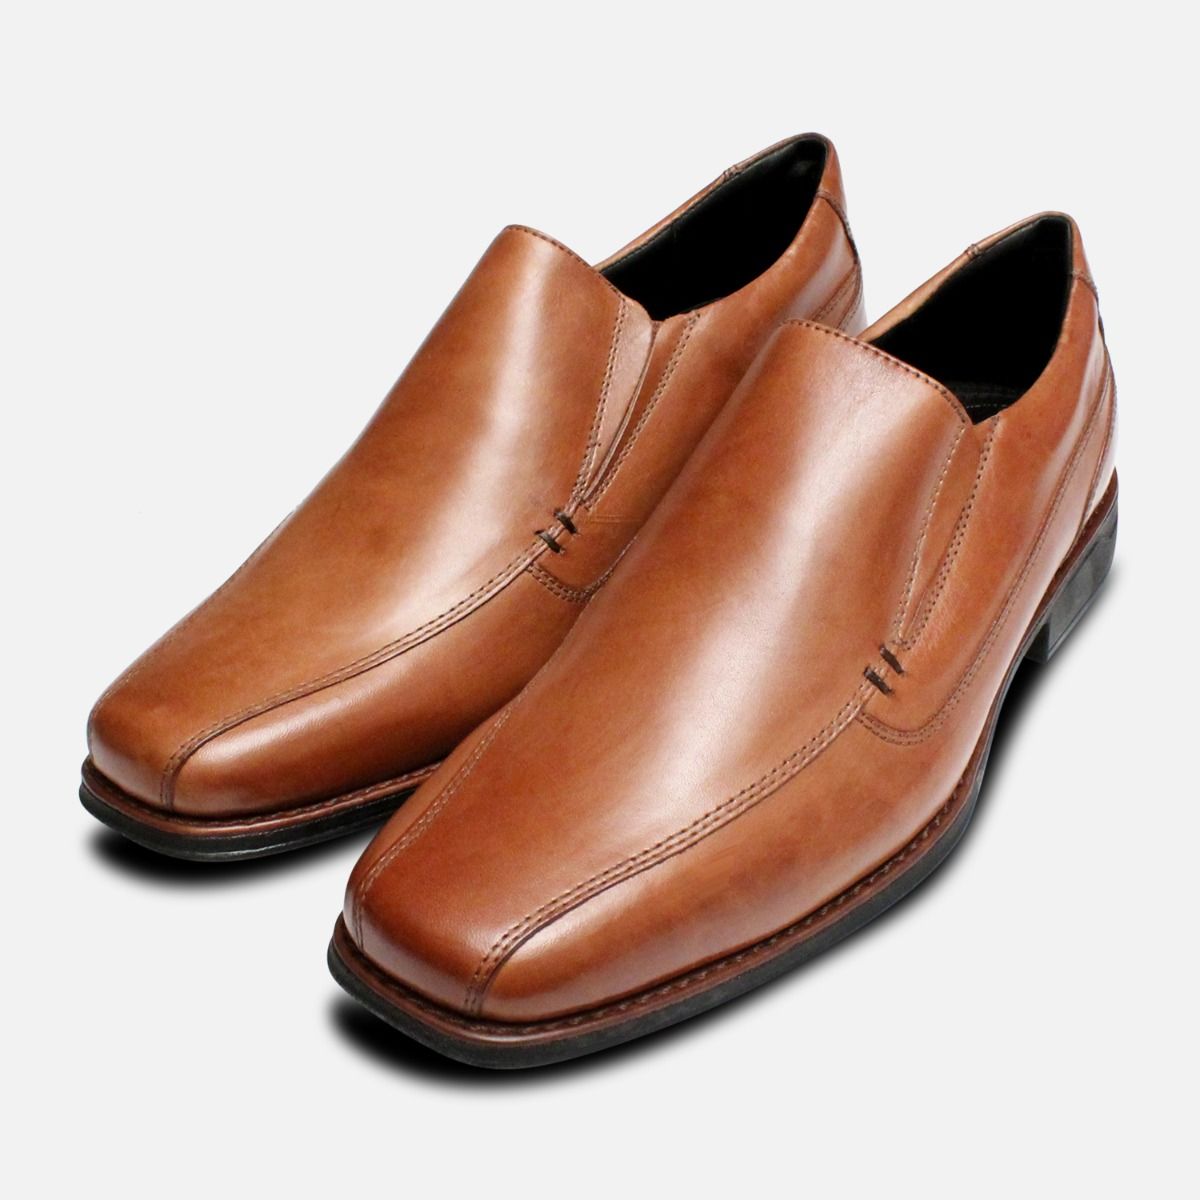 Square Toe Slip On Loafers in Tan by 